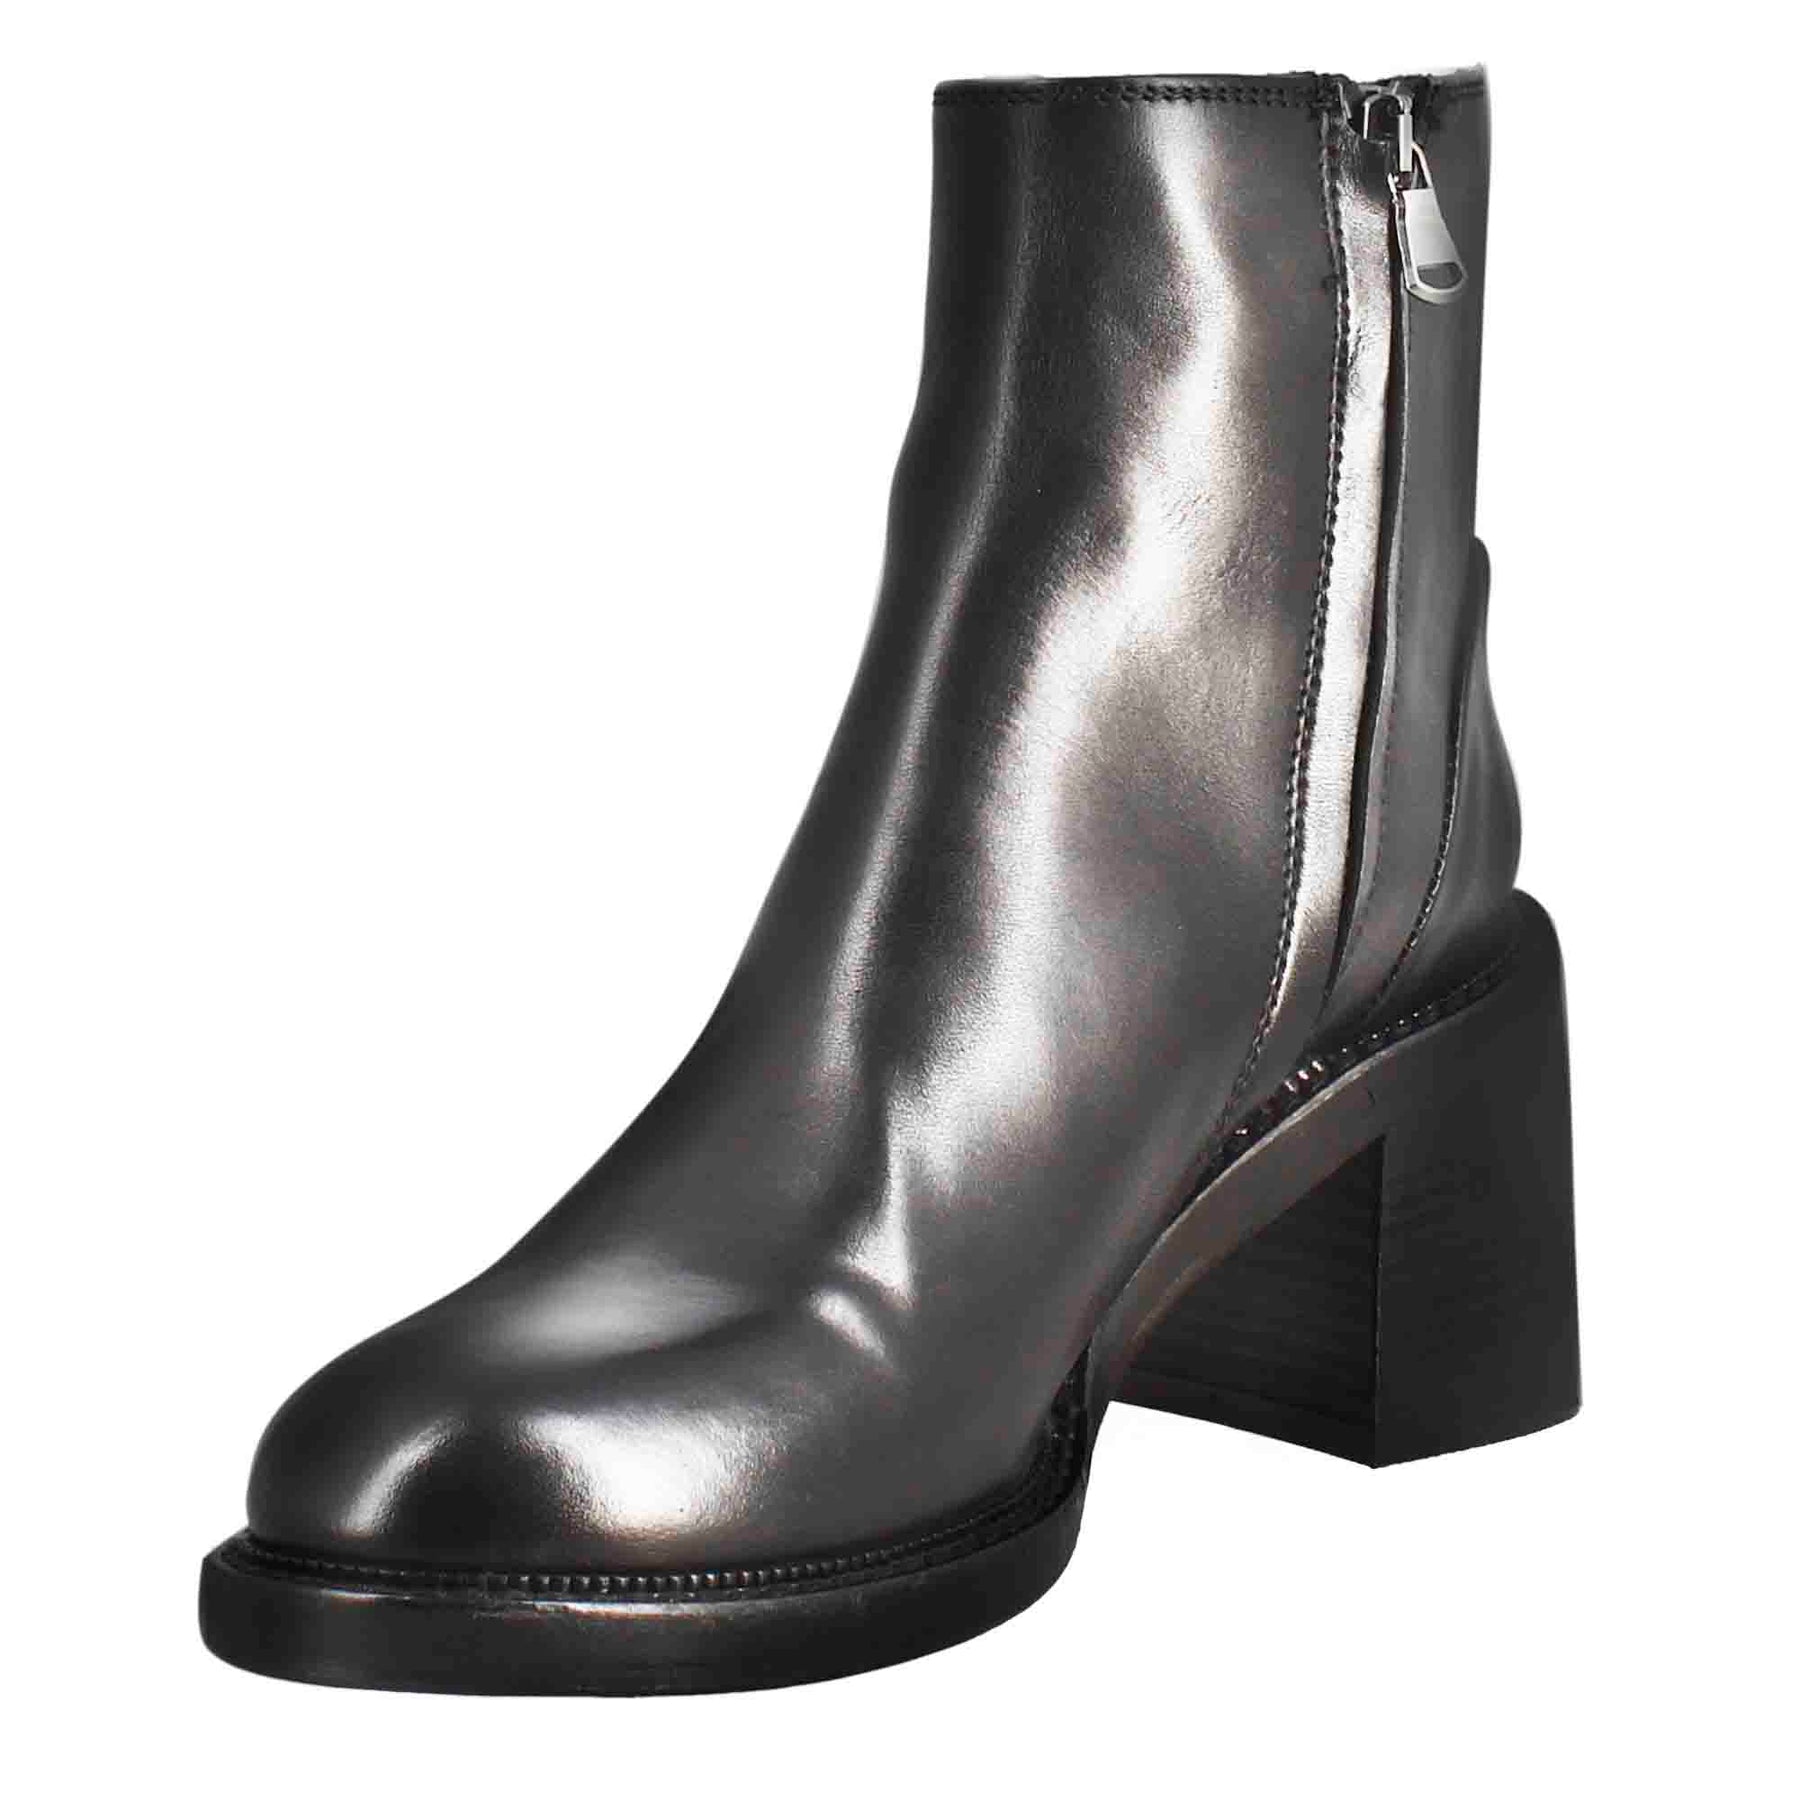 Women's low diver boot with heel in black washed leather